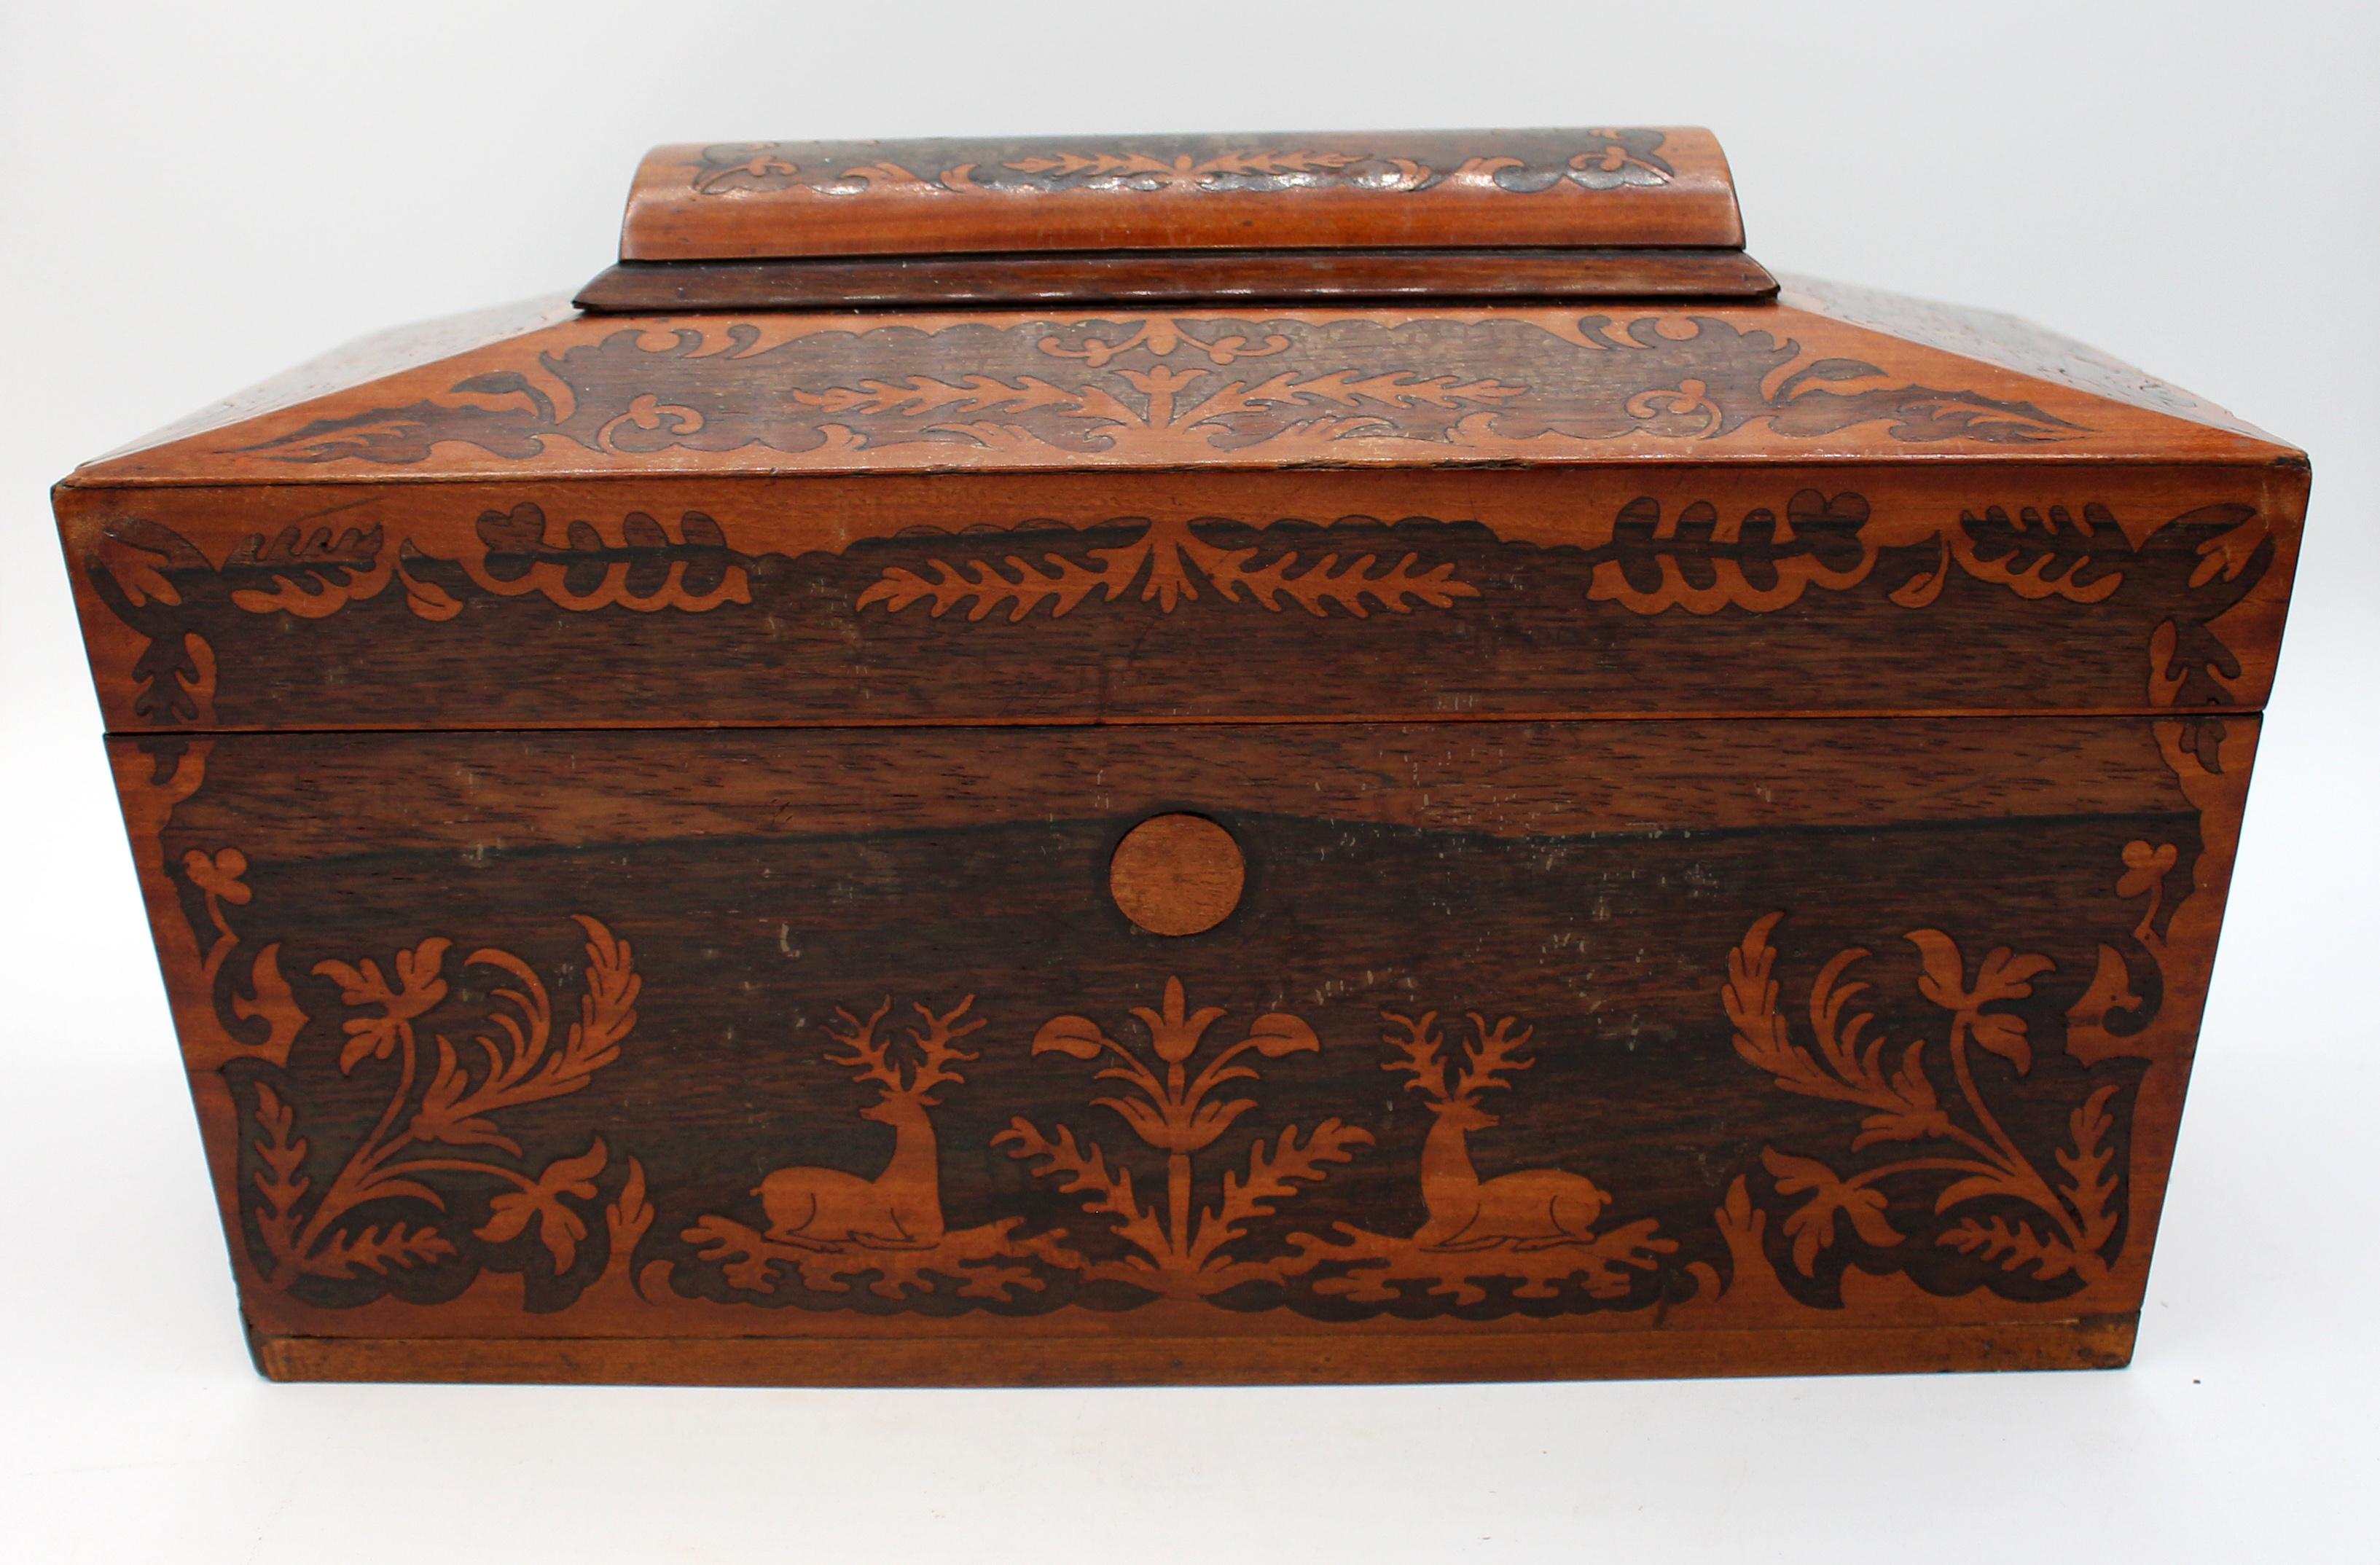 English circa 1830 stag & naturalistic inlaid box. The front & top extensively inlaid, featuring a pair of stags among foliage. Sarcophagus form. Once fitted as a tea caddy. Satinwood & rosewood. Some veneer losses restored at bottom back & side.